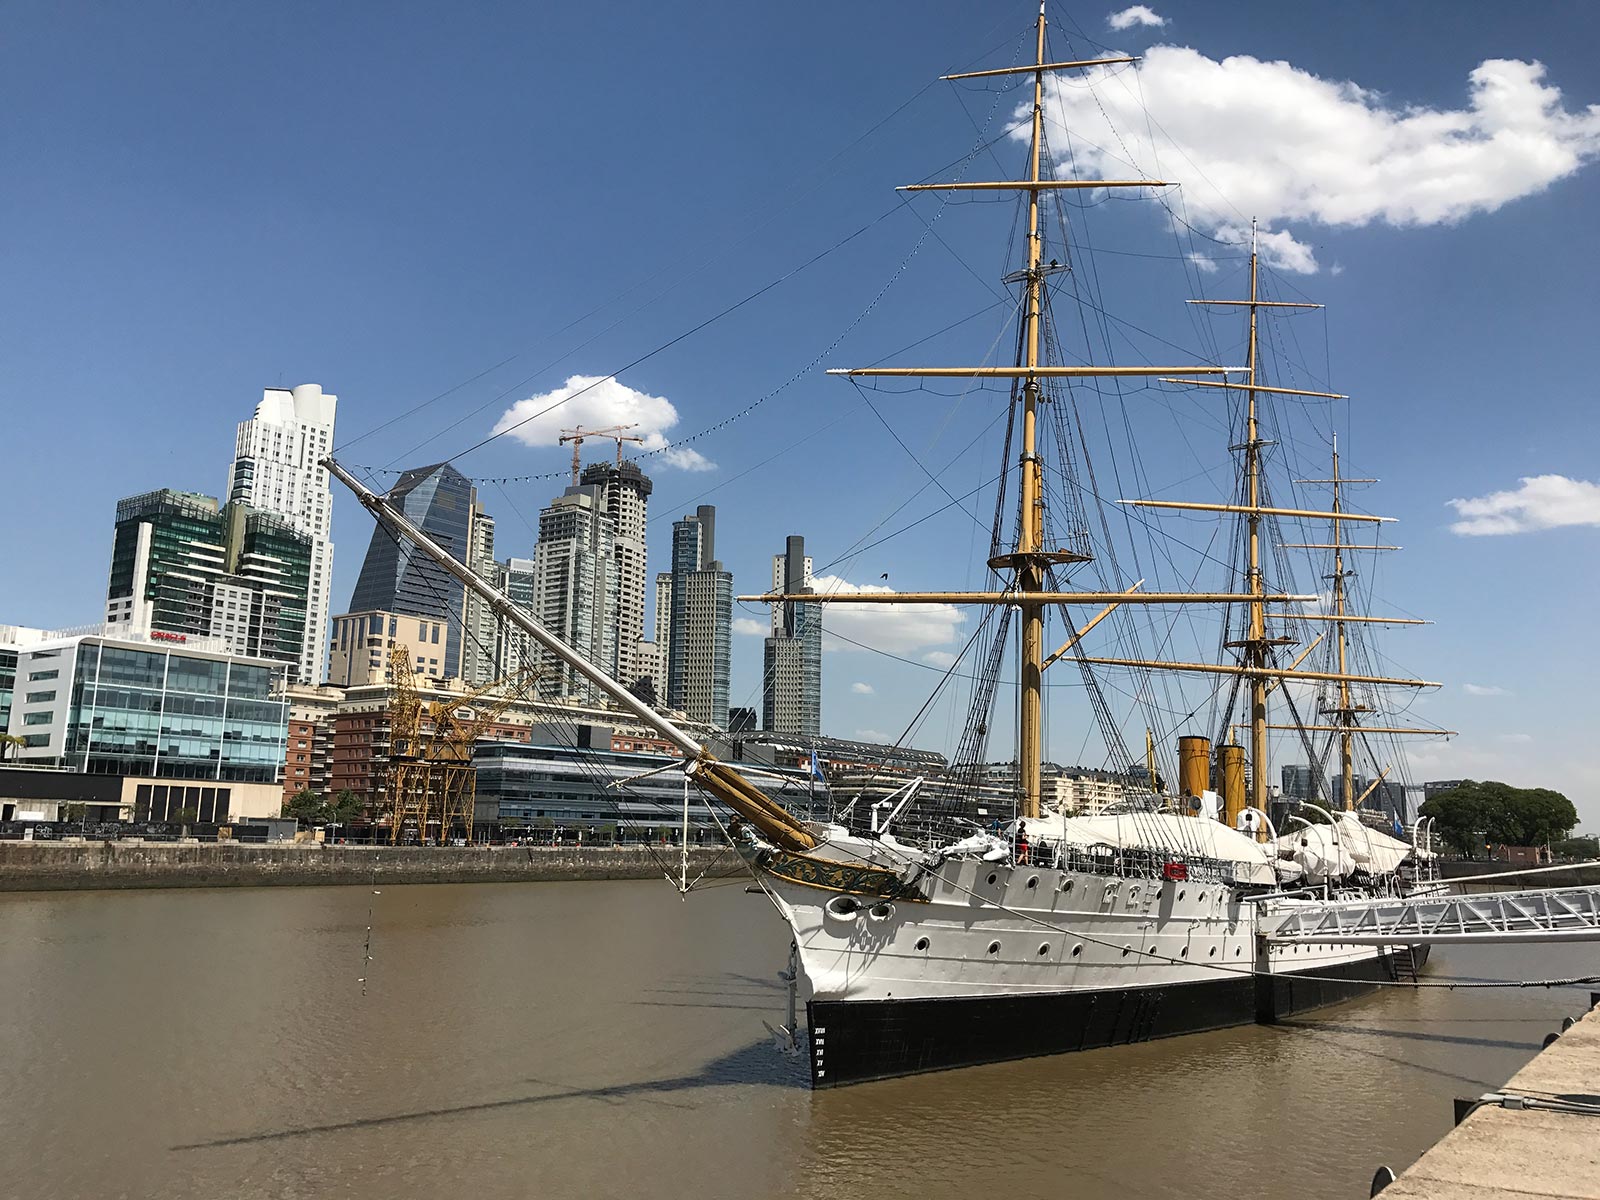 Tall ship at the river in Buenos Aires. The biggest derby in the world